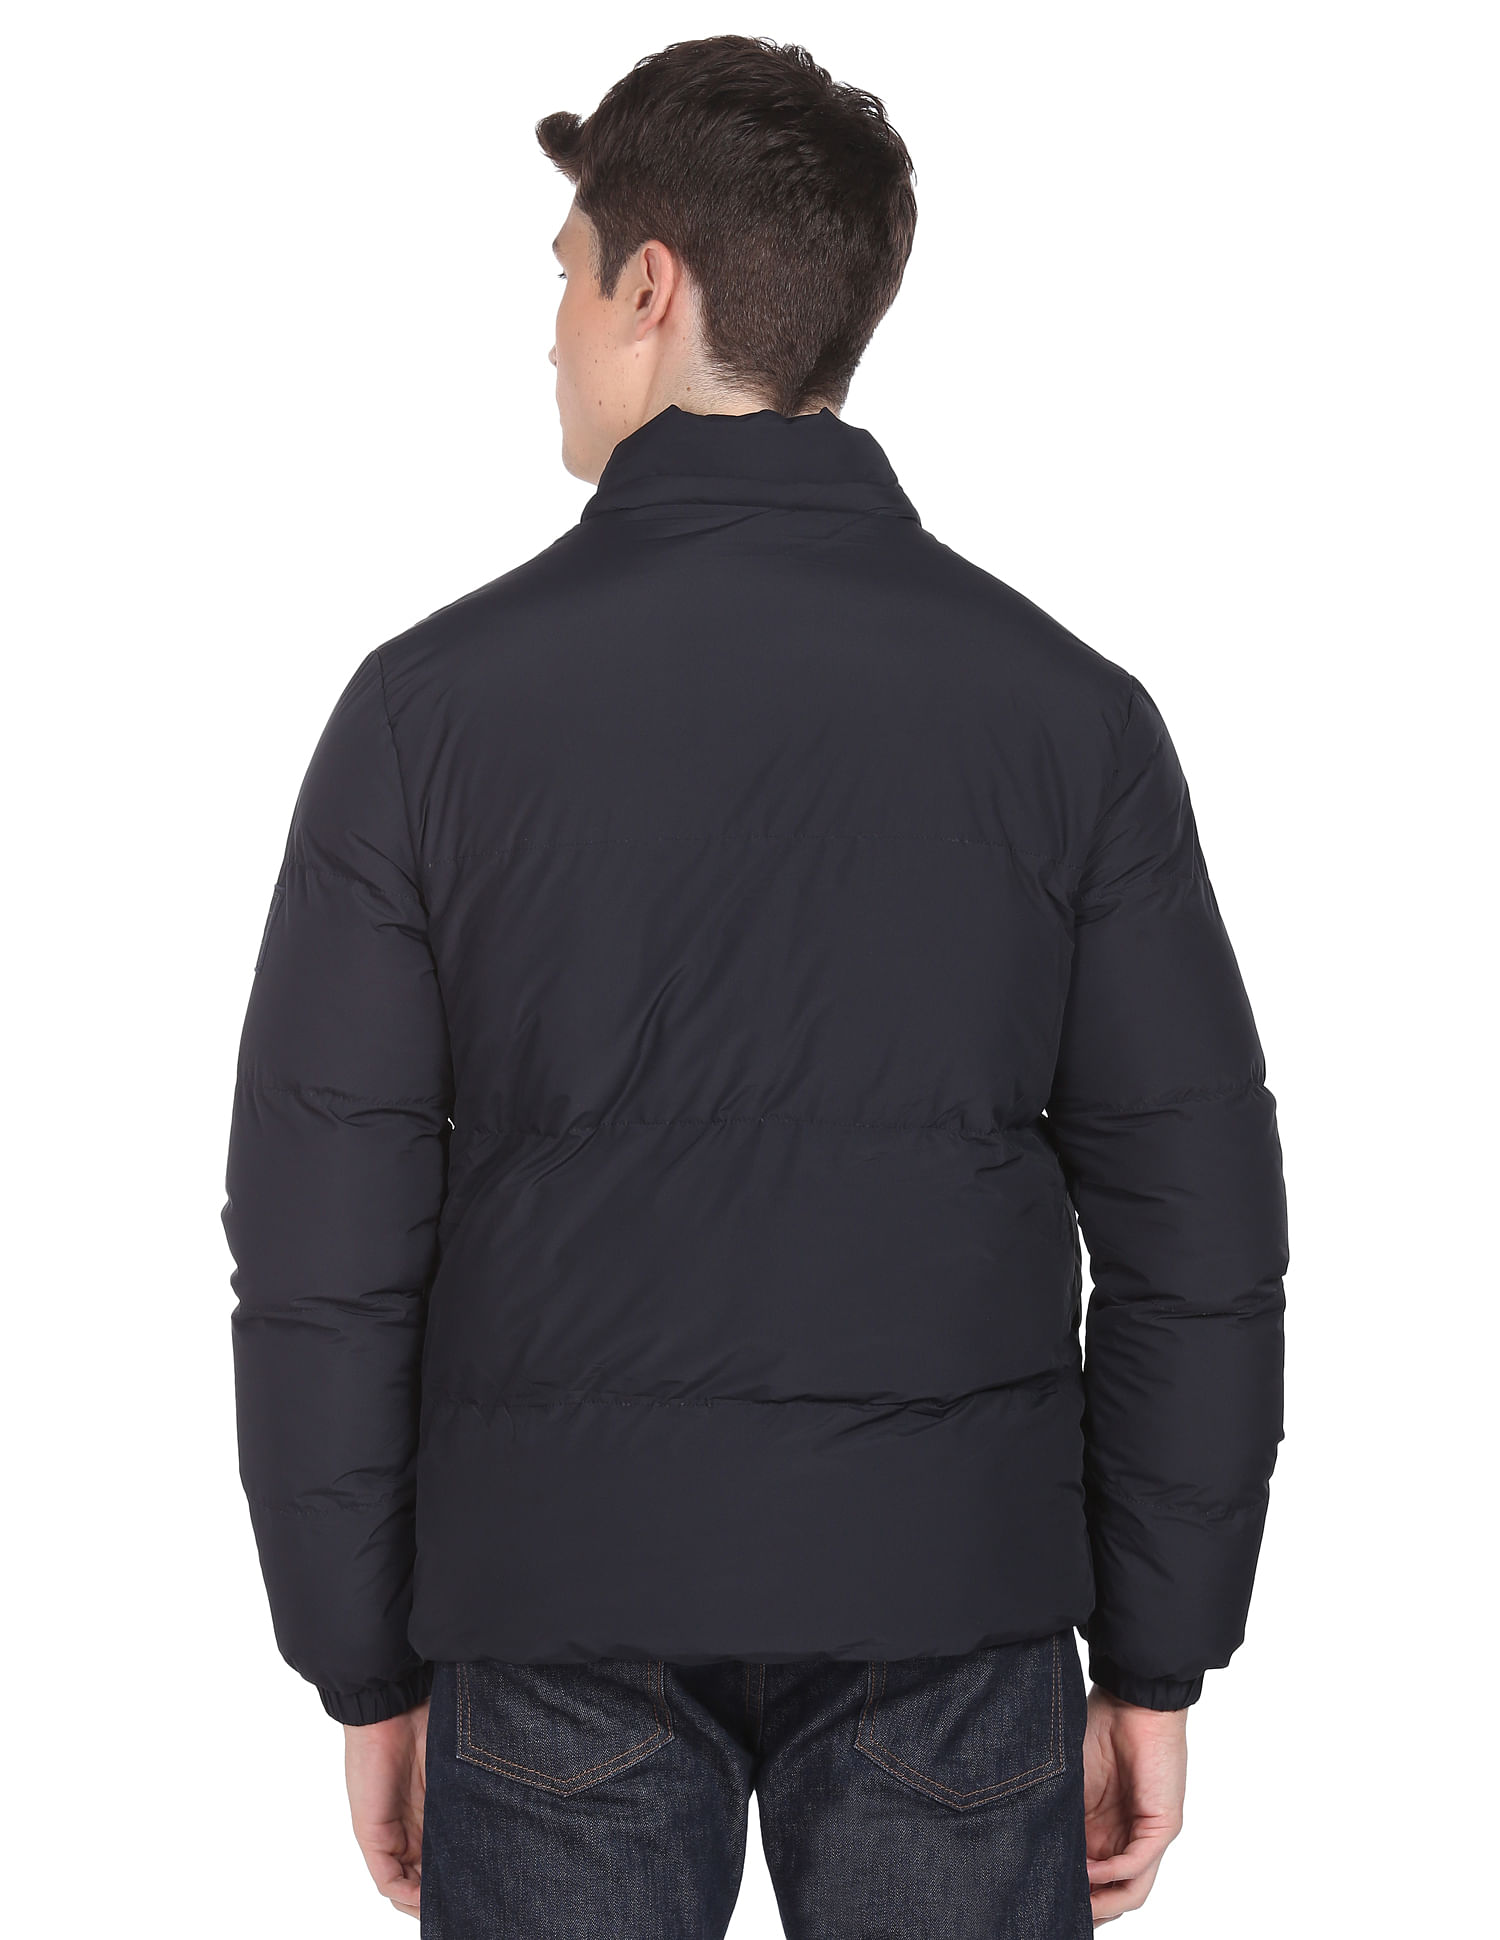 Buy Arrow Sports Stand Collar Zip Up Solid Jacket - NNNOW.com